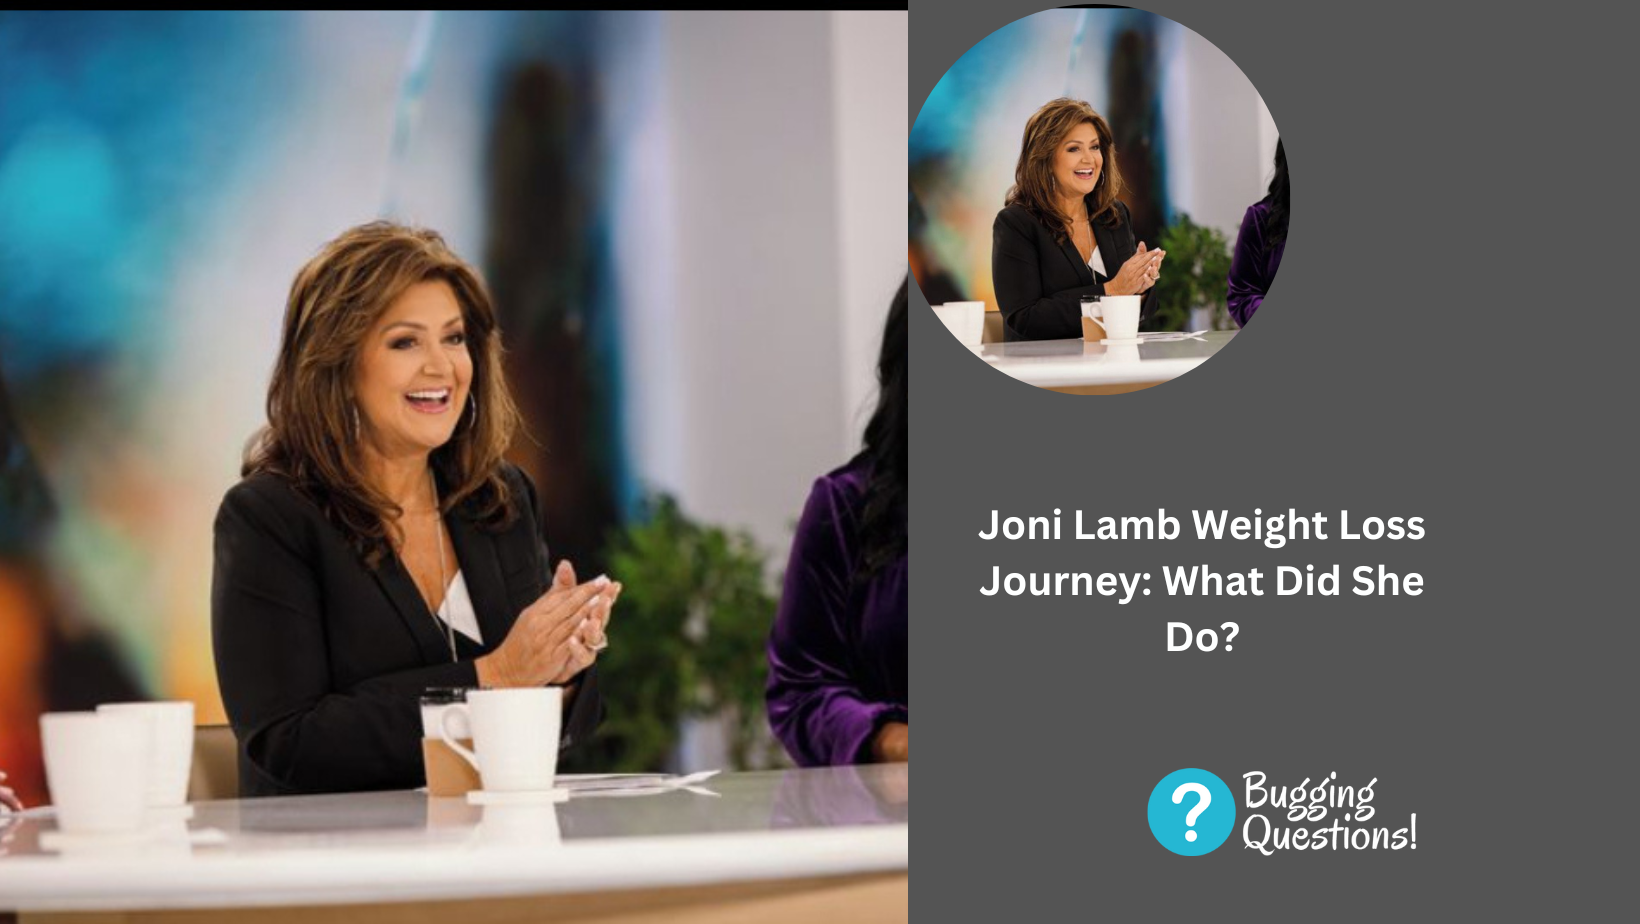 Joni Lamb Weight Loss Journey: What Did She Do?